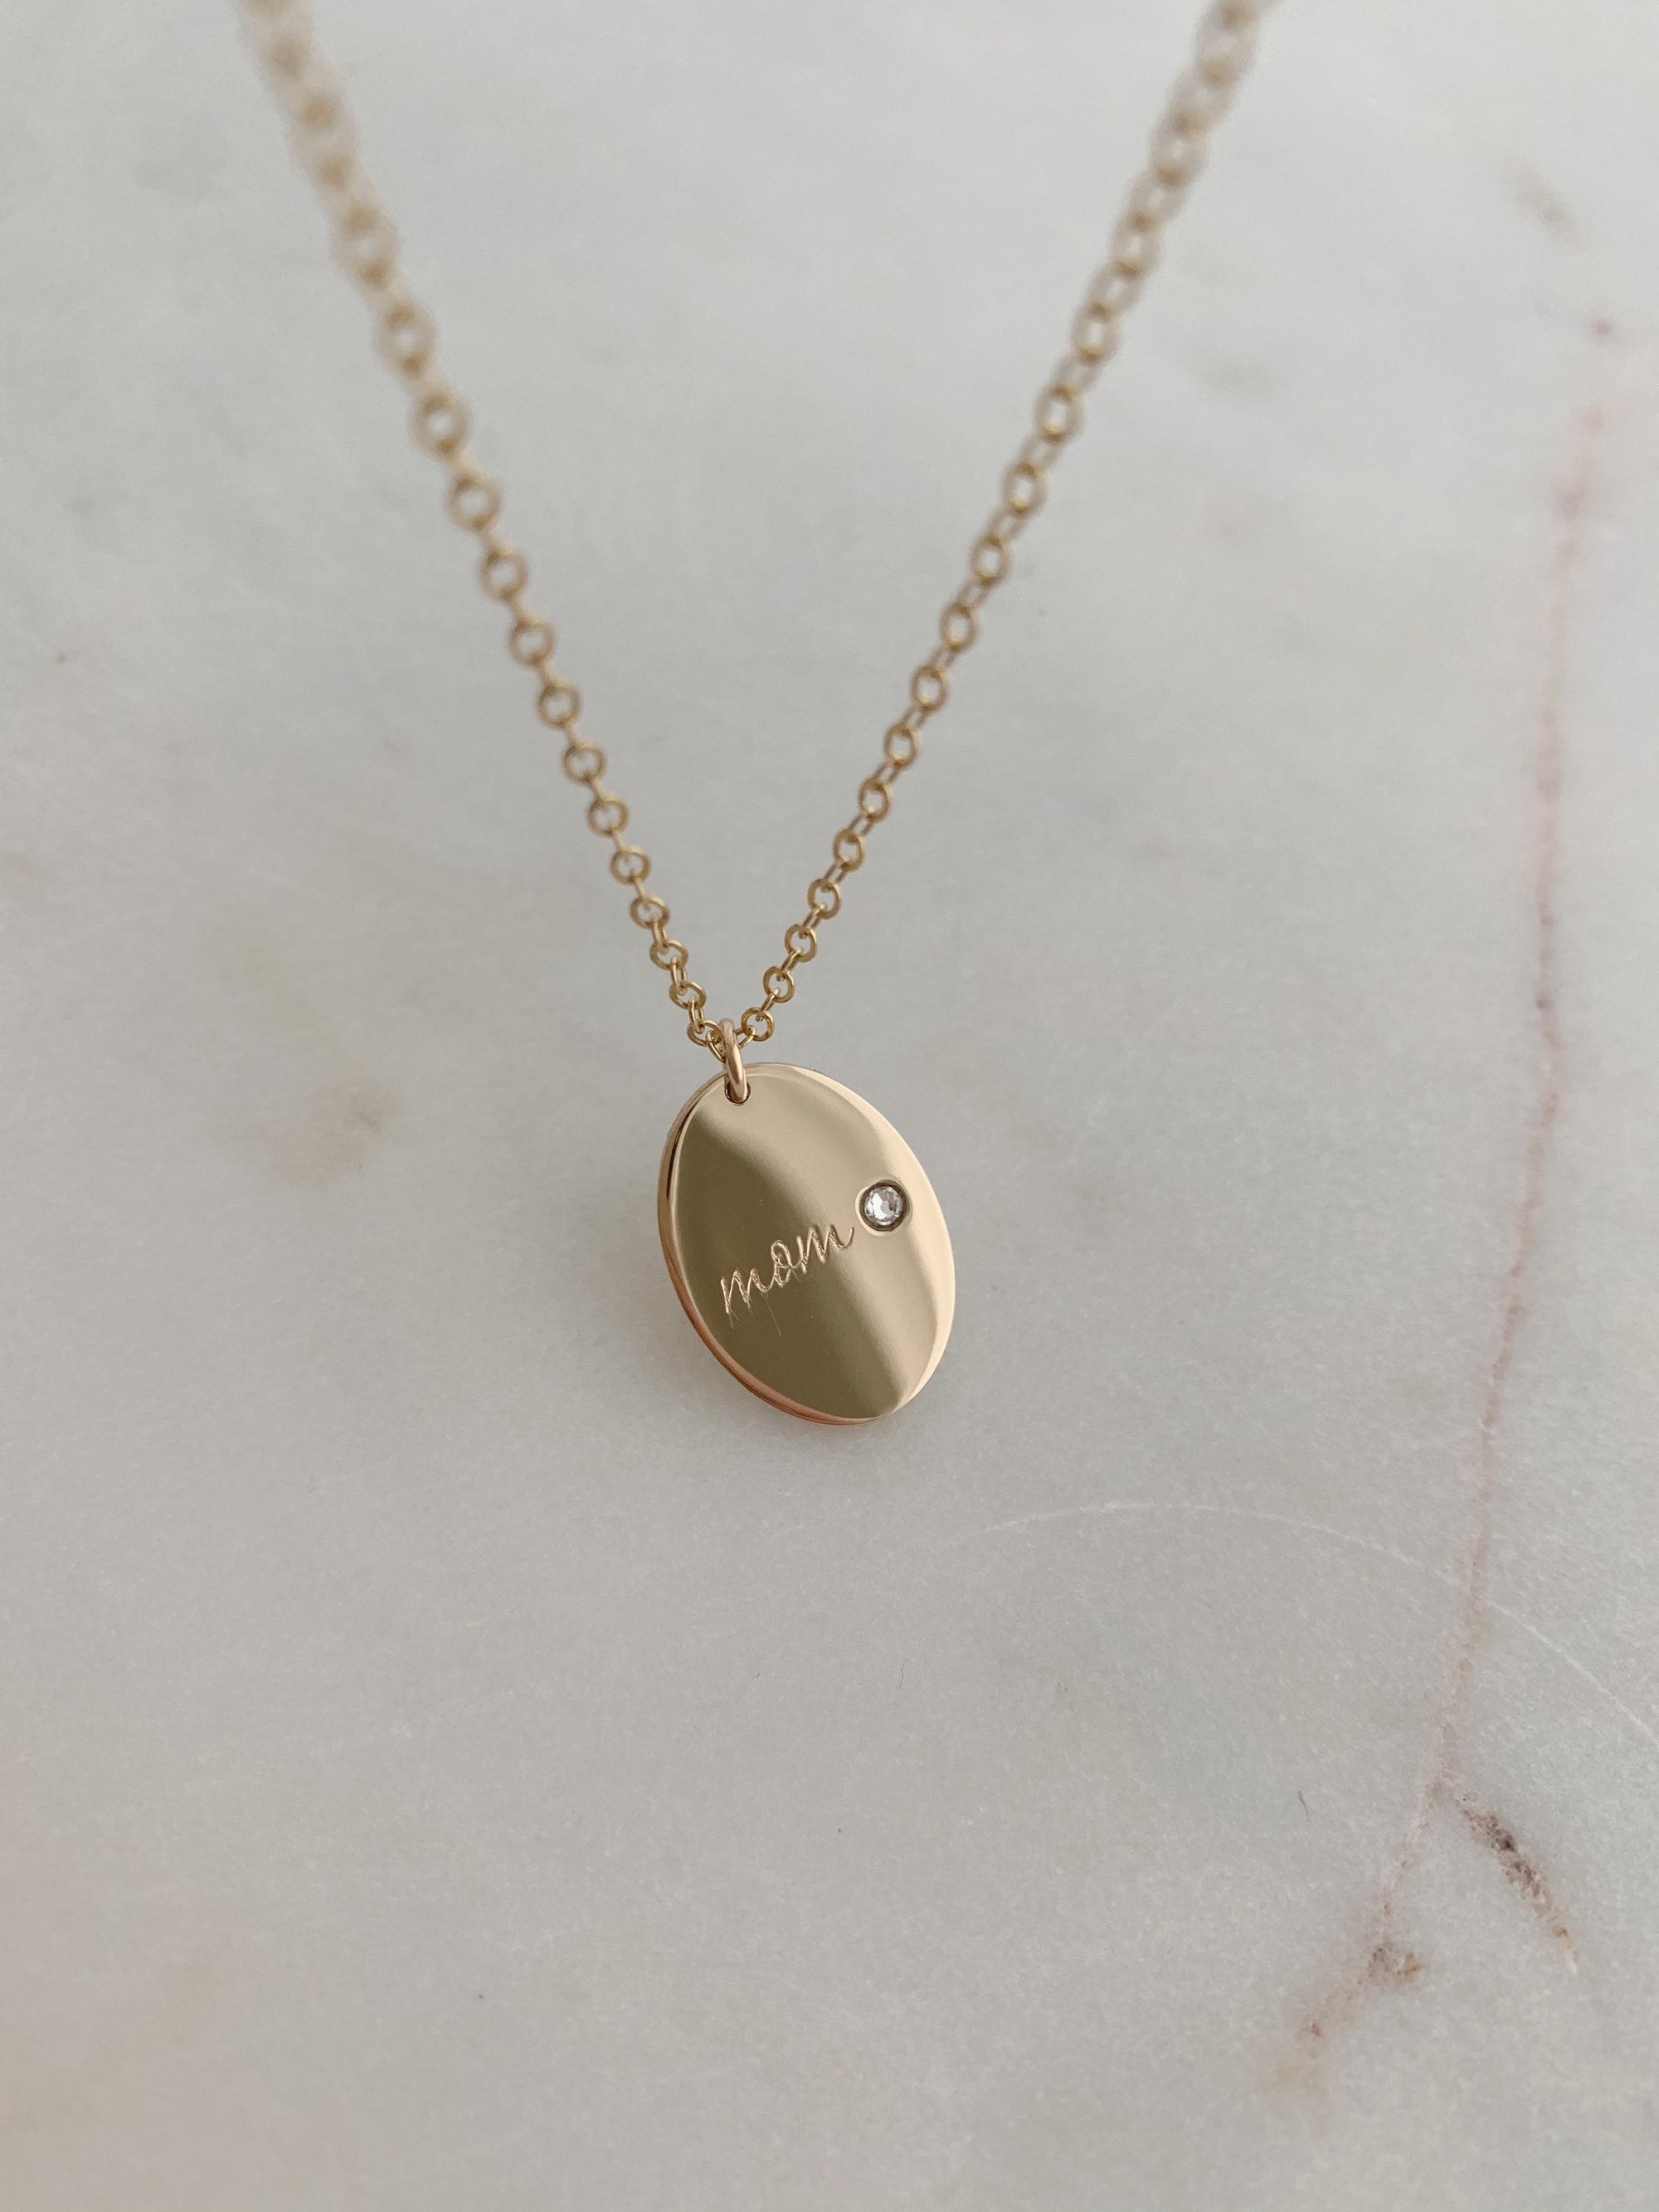 MOM Engraved Oval Pendant Necklace